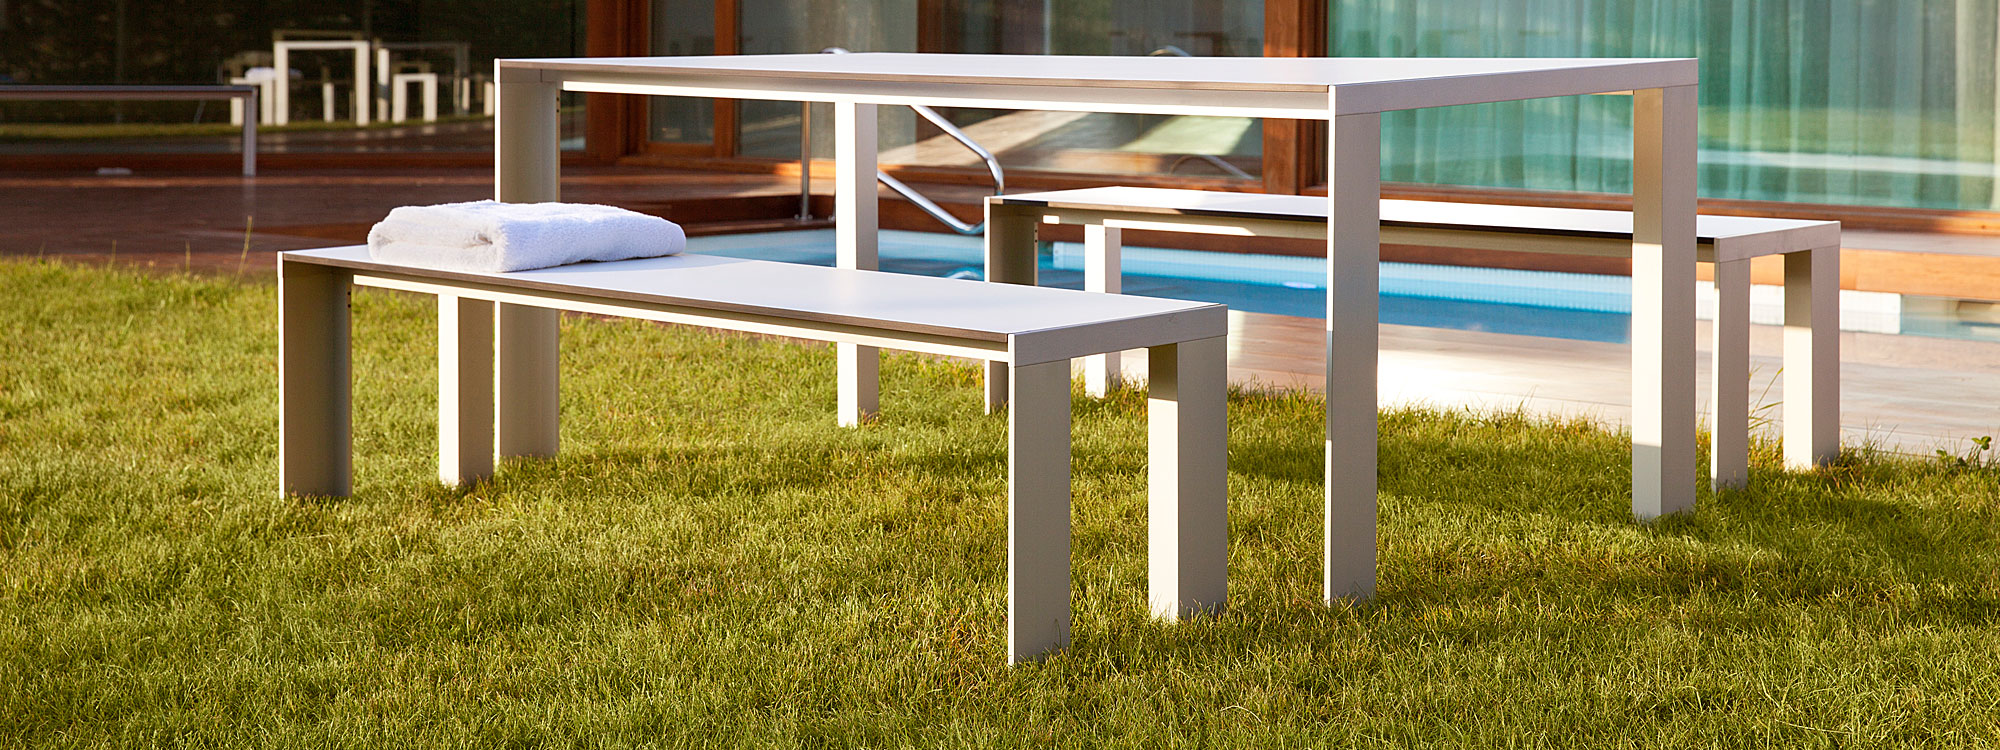 STUA Deneb Minimalist Tables and Benches - Luxury Modern Garden Table And Bench.